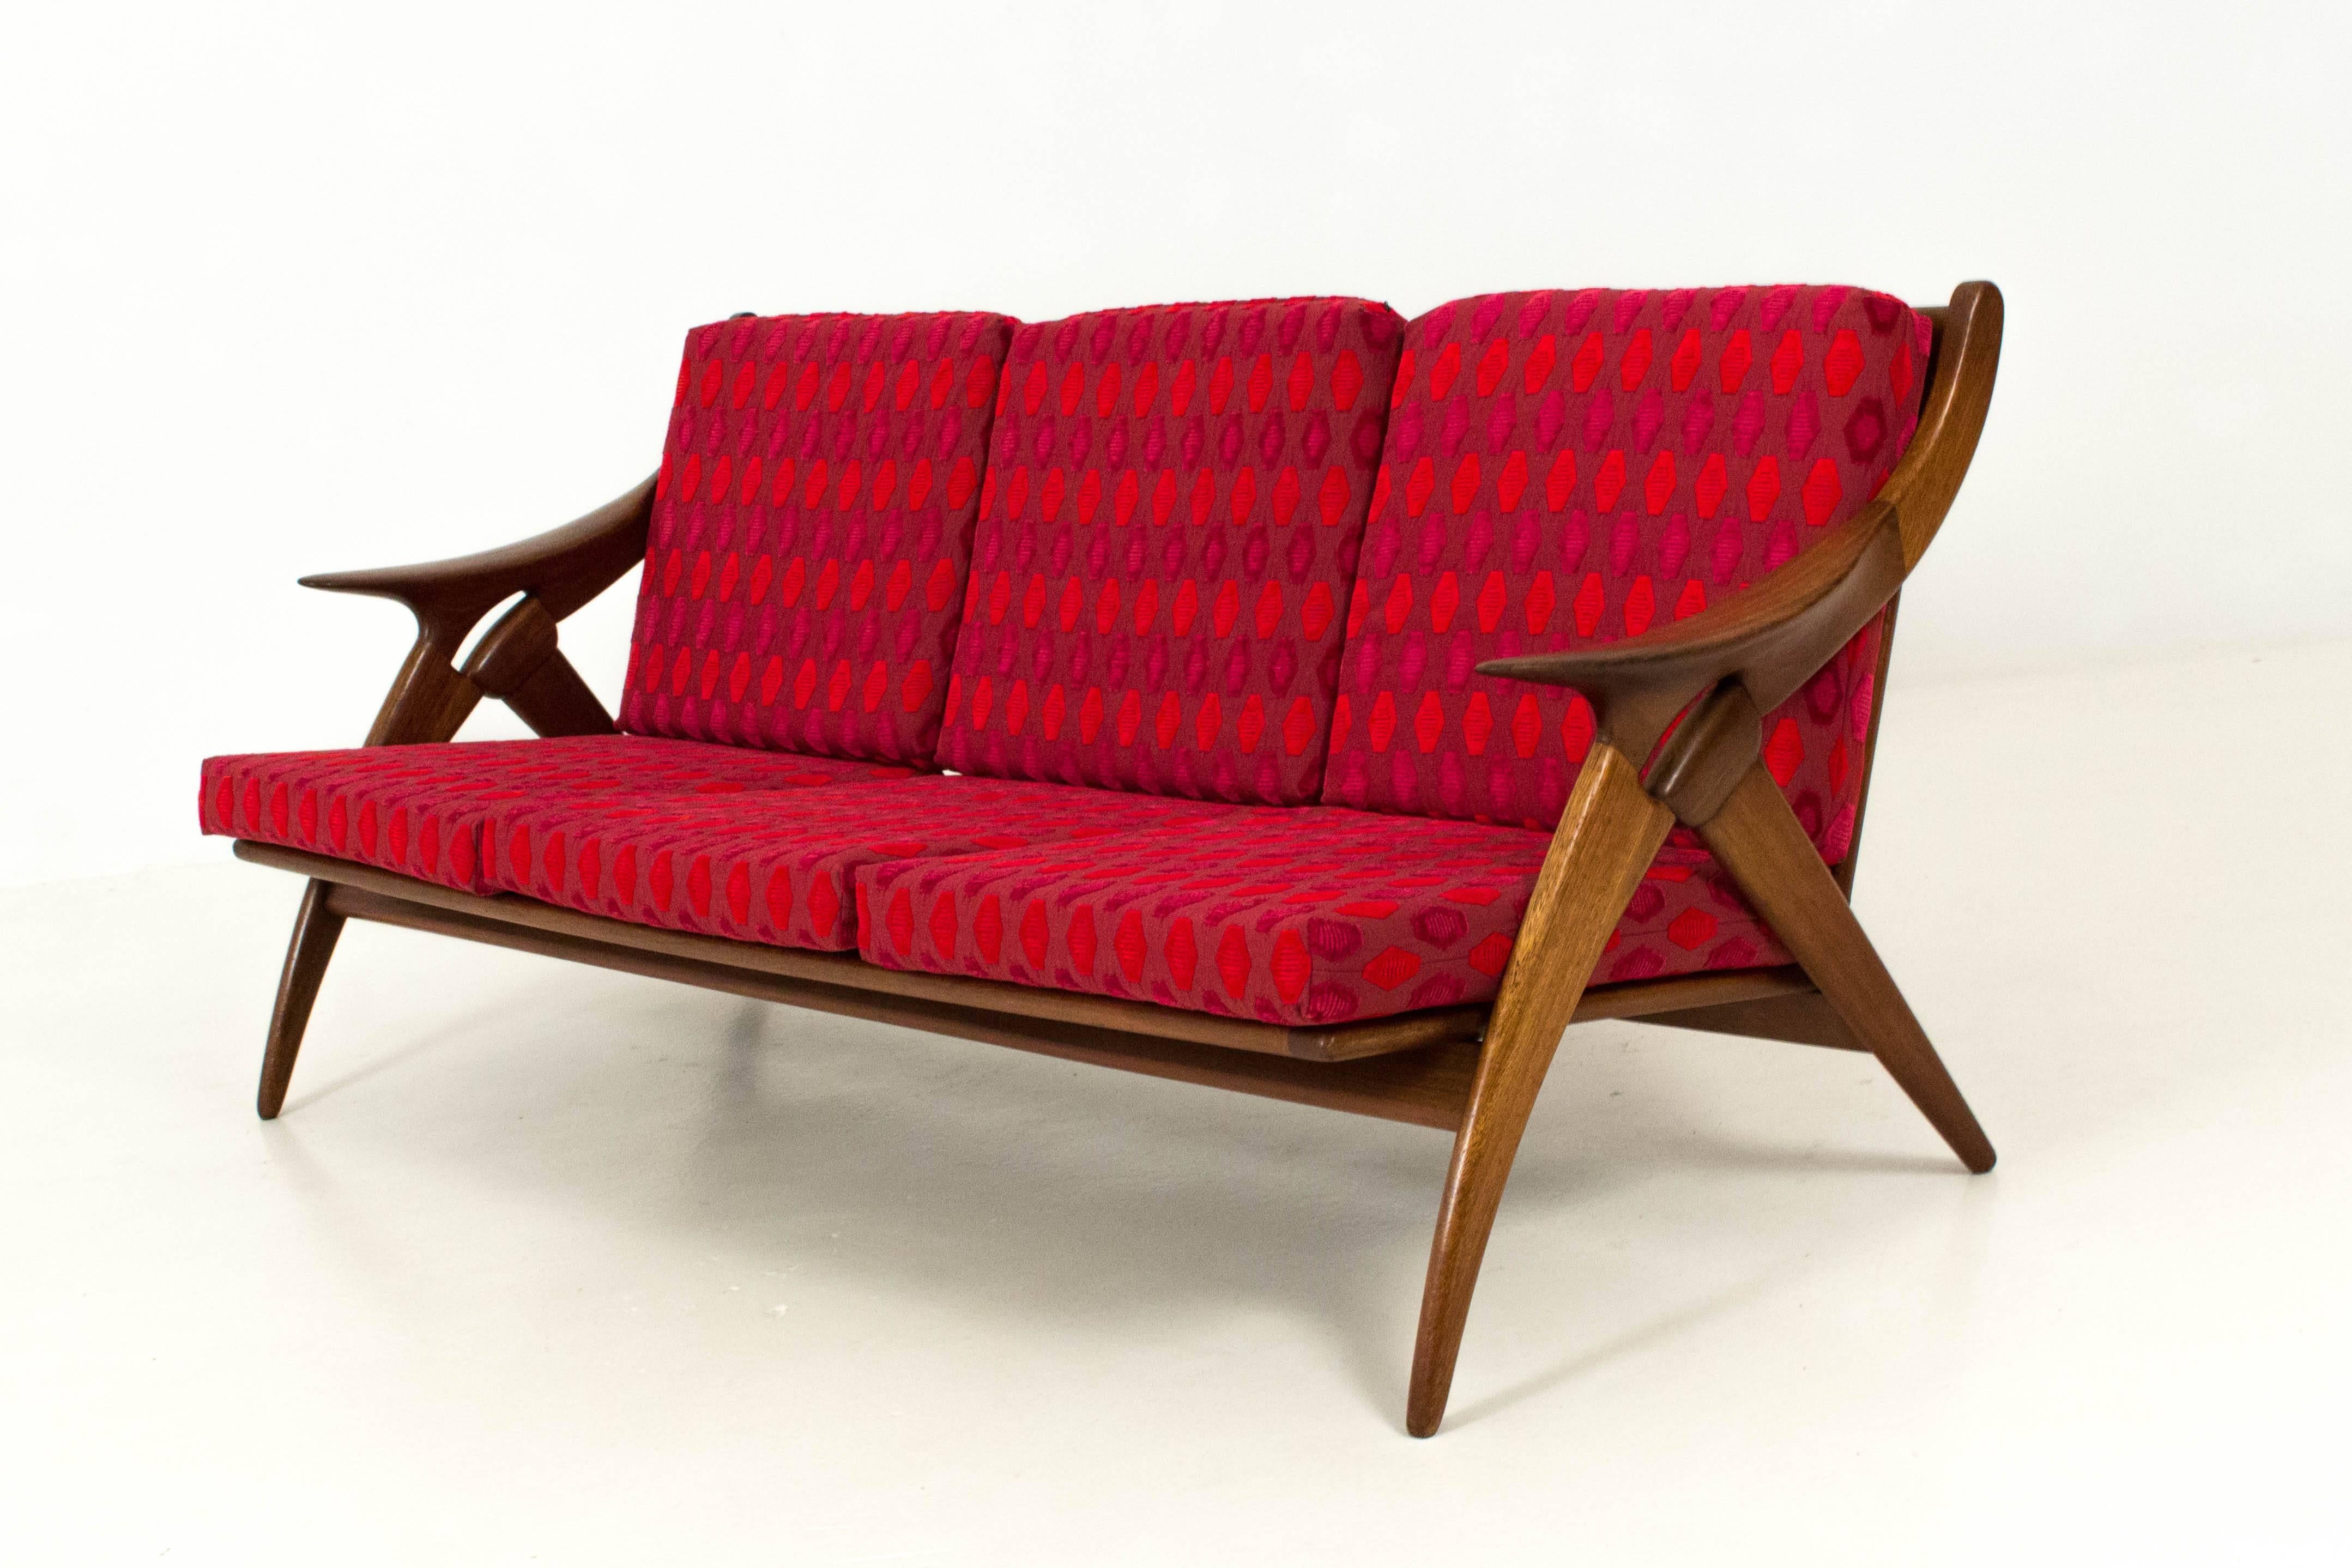 Stunning Mid-Century Modern sofa and lounge chairs by De Ster Gelderland.
Outstanding sculptural design in solid teak.
New upholstered cushions with a funky fabric.
Measurements sofa: H:76 cm x W: 168 cm x D:60 cm.
Measurements lounge chairs: H: